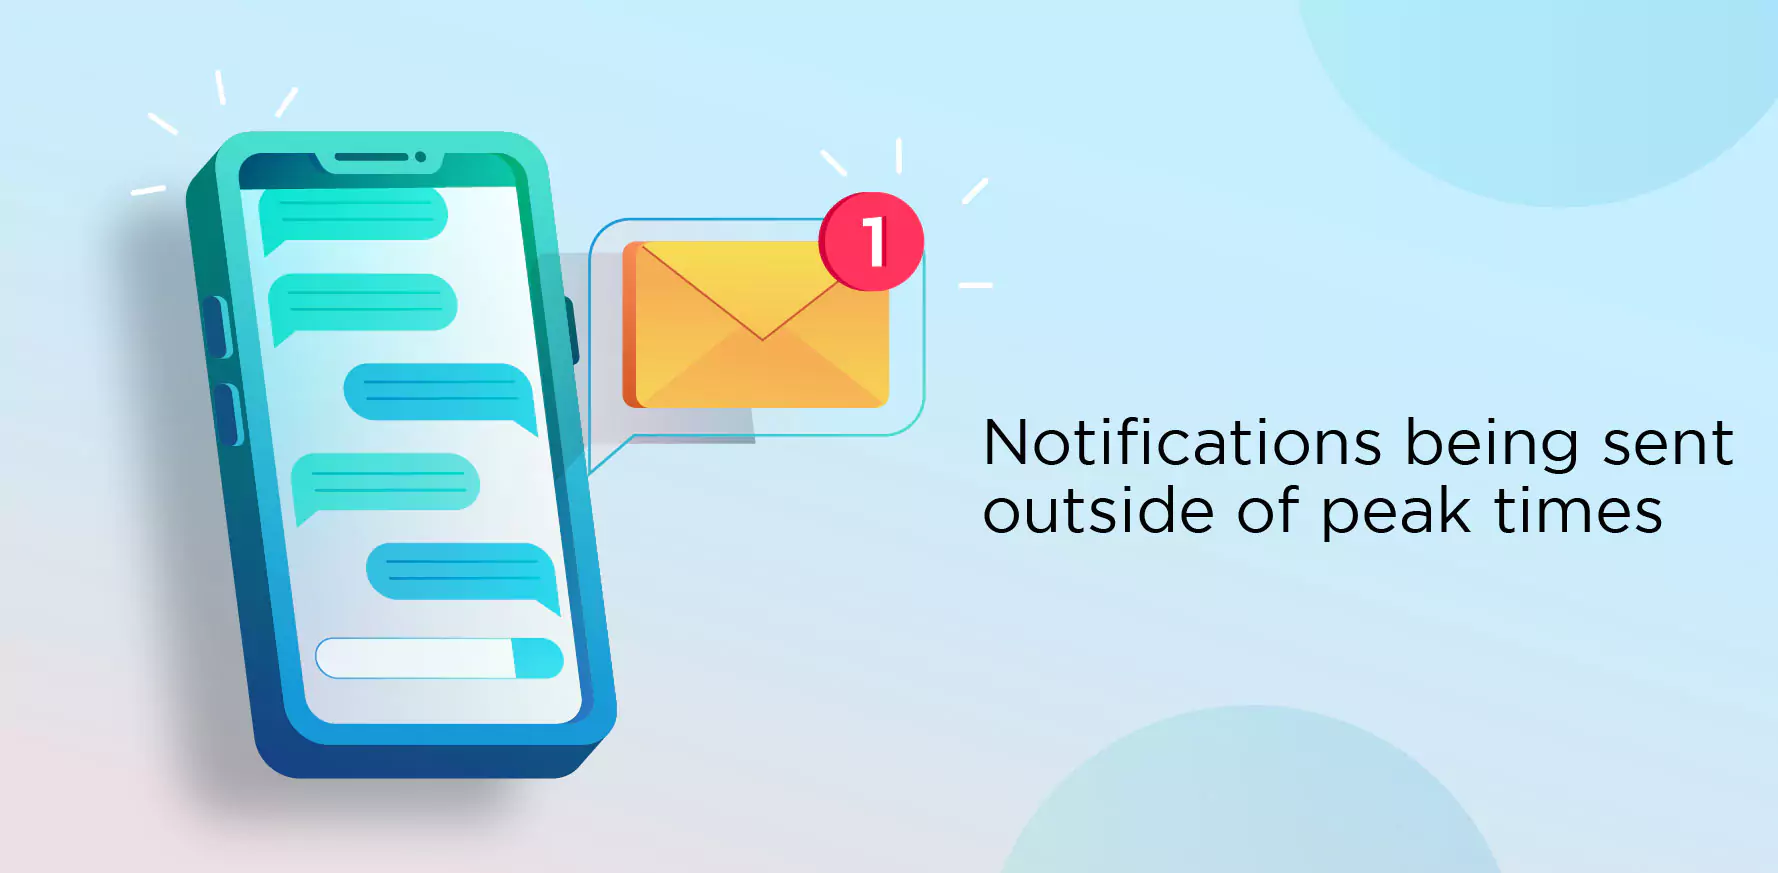  Notifications being sent outside of peak times